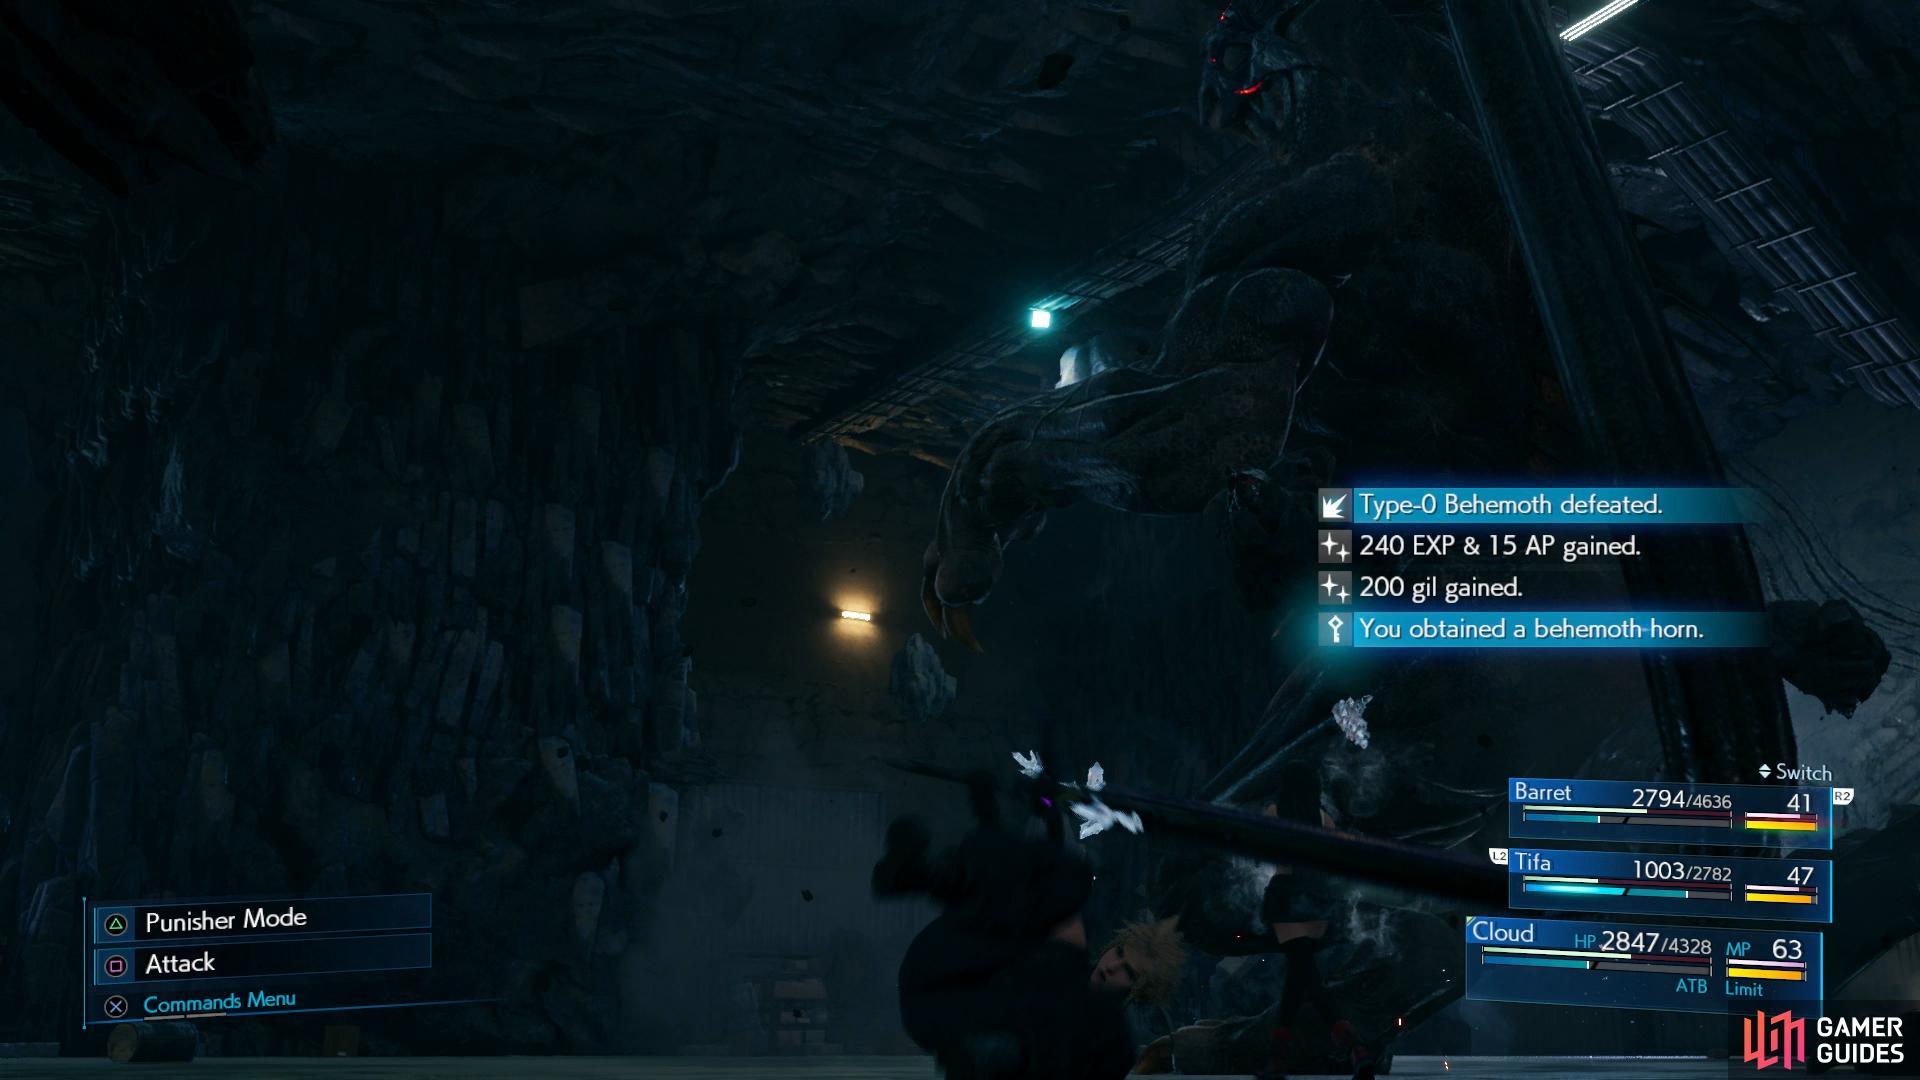 you'll need to finish the Subterranean Menace Quest for the Behemoth Horn